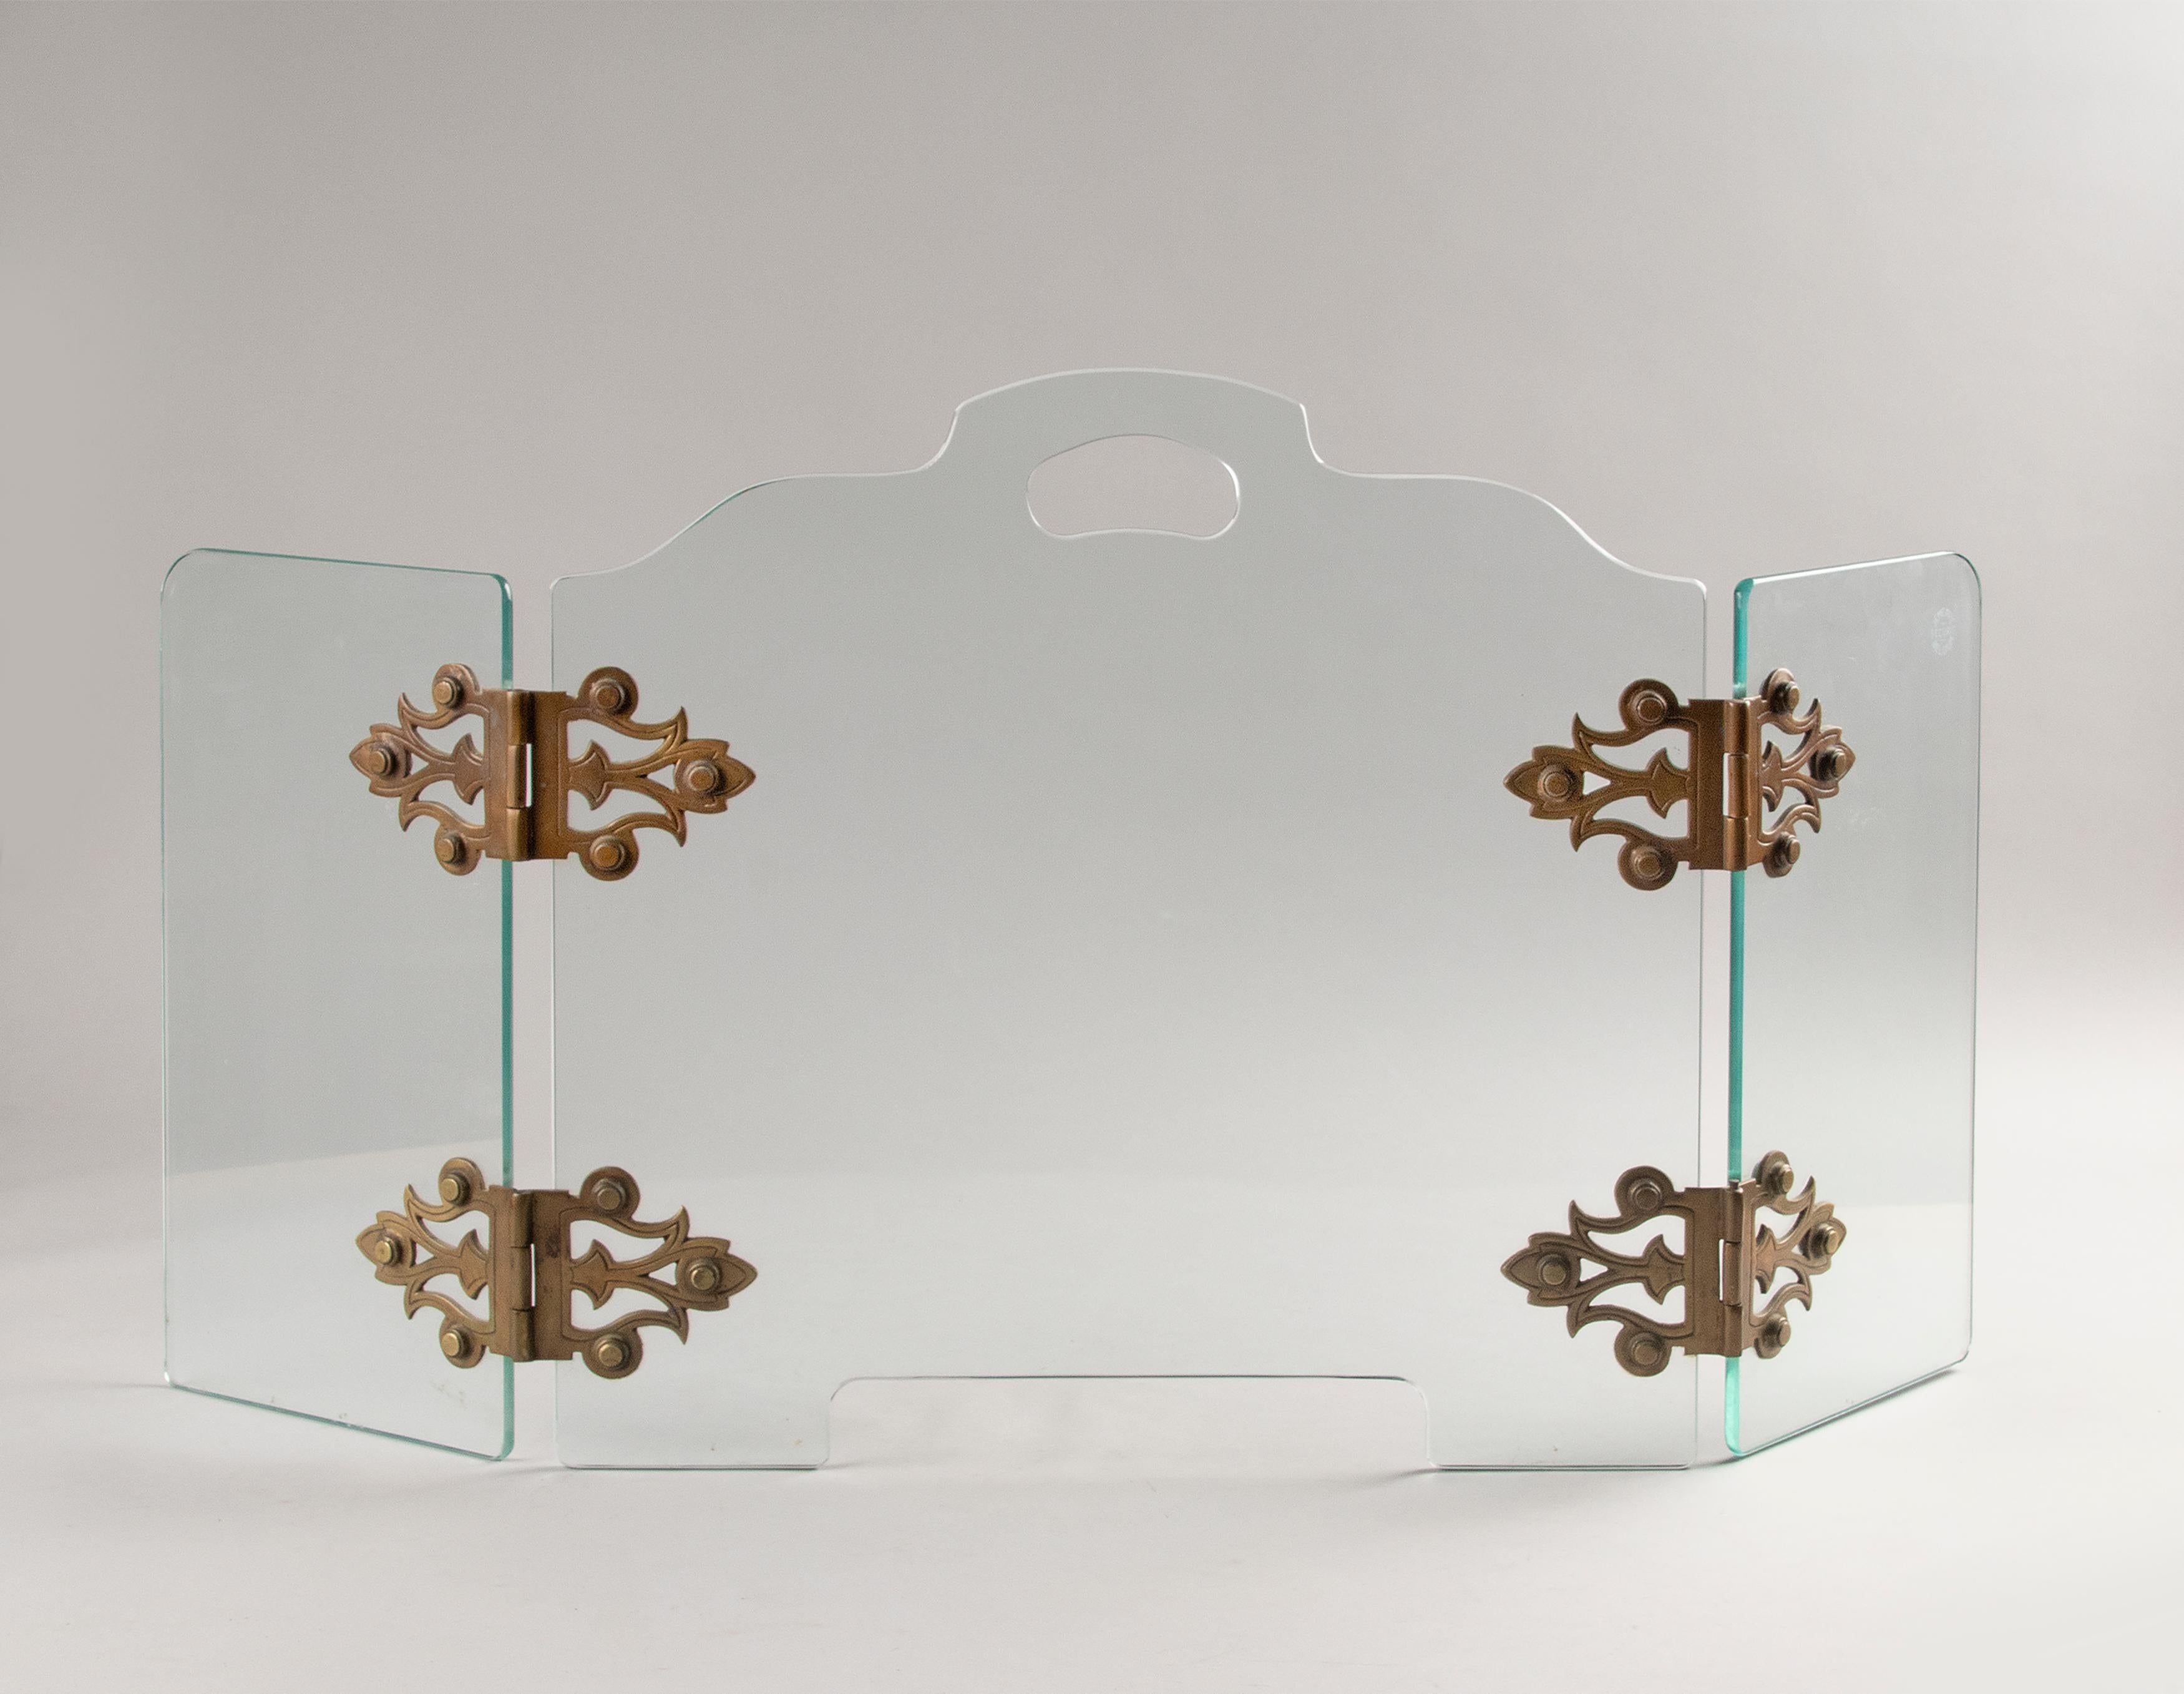 Mid-20th Century Mid-Century Modern Glass Folding Triptych Fire Screen by Jemeppe For Sale